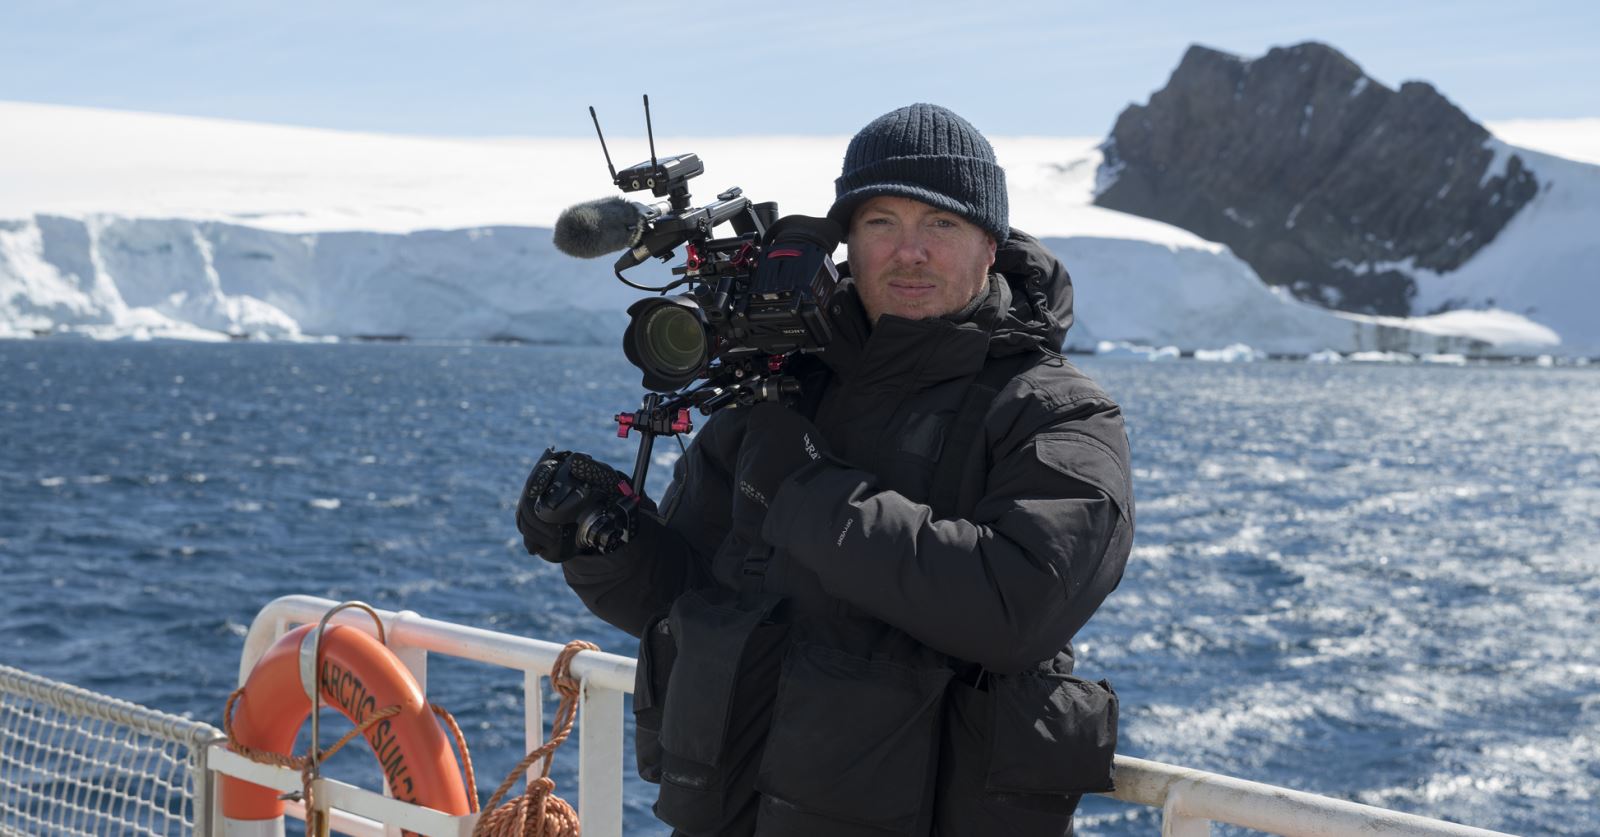 A huge welcome to returning member Robert McKenzie, seen here filming for the BBC in the Antarctic.